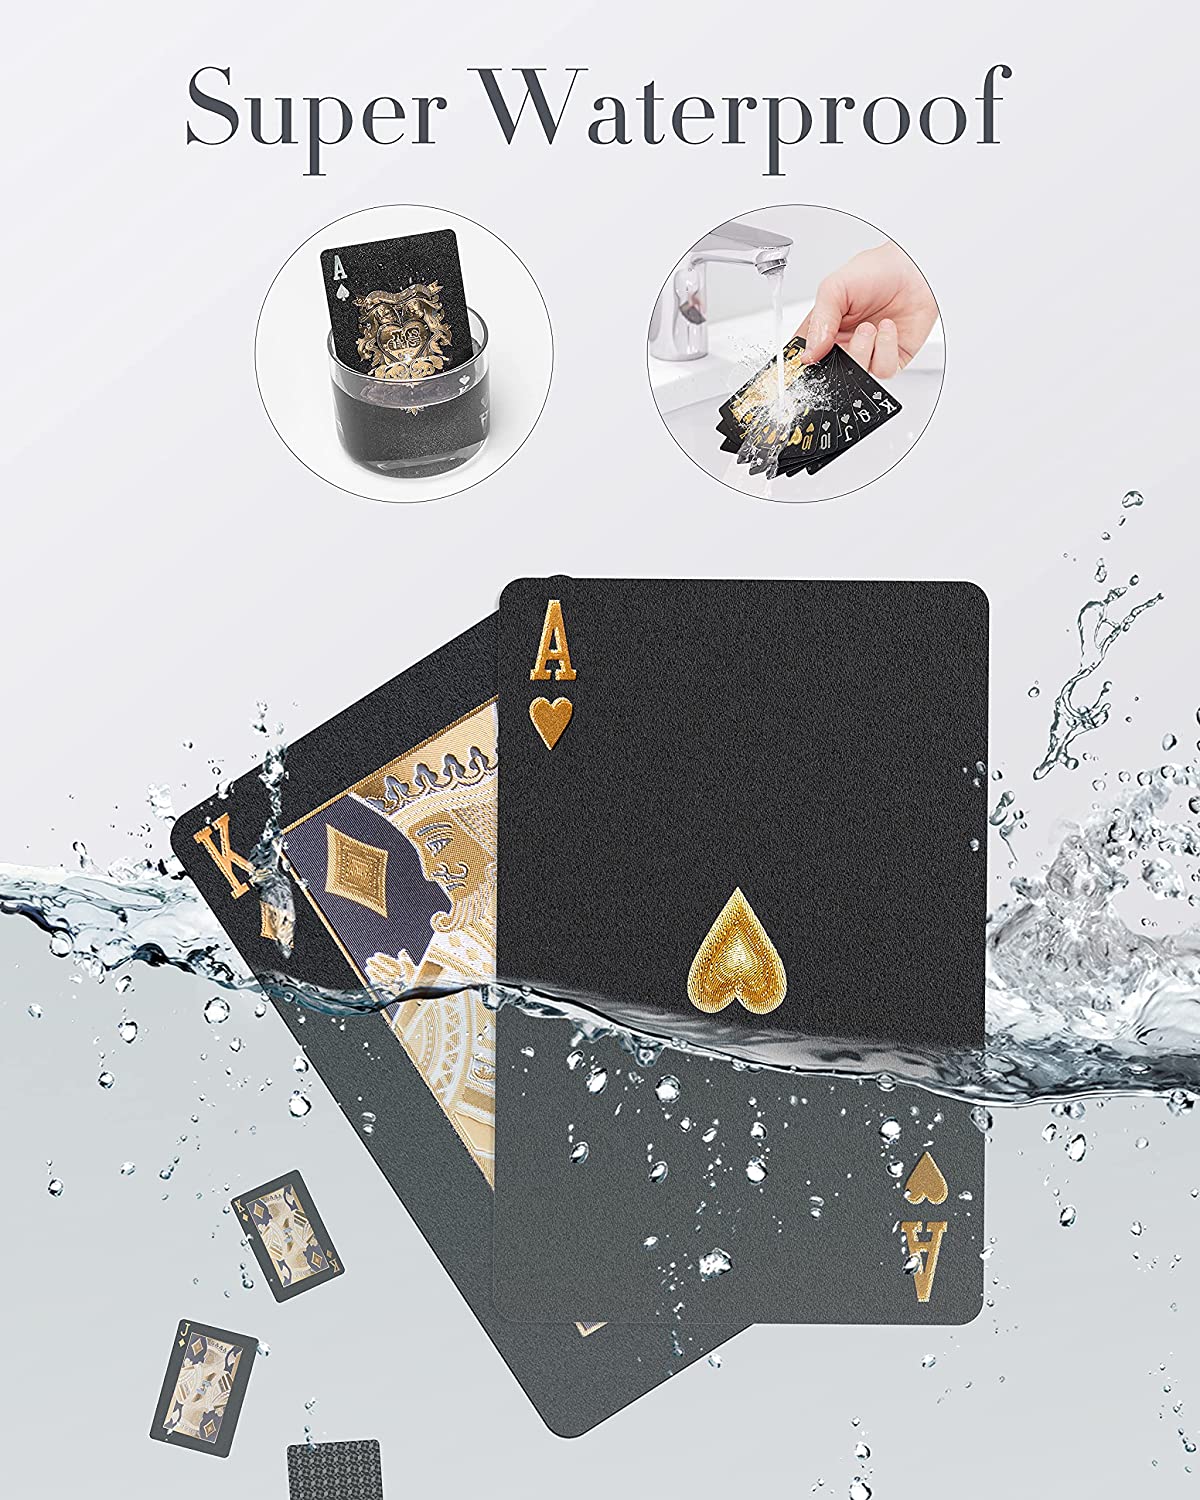 Black Matte Magic Waterproof Non Slippery Deck of Poker Cards with No Art Premium Quality 24K Gold and Silver Plated Replica Bills 6